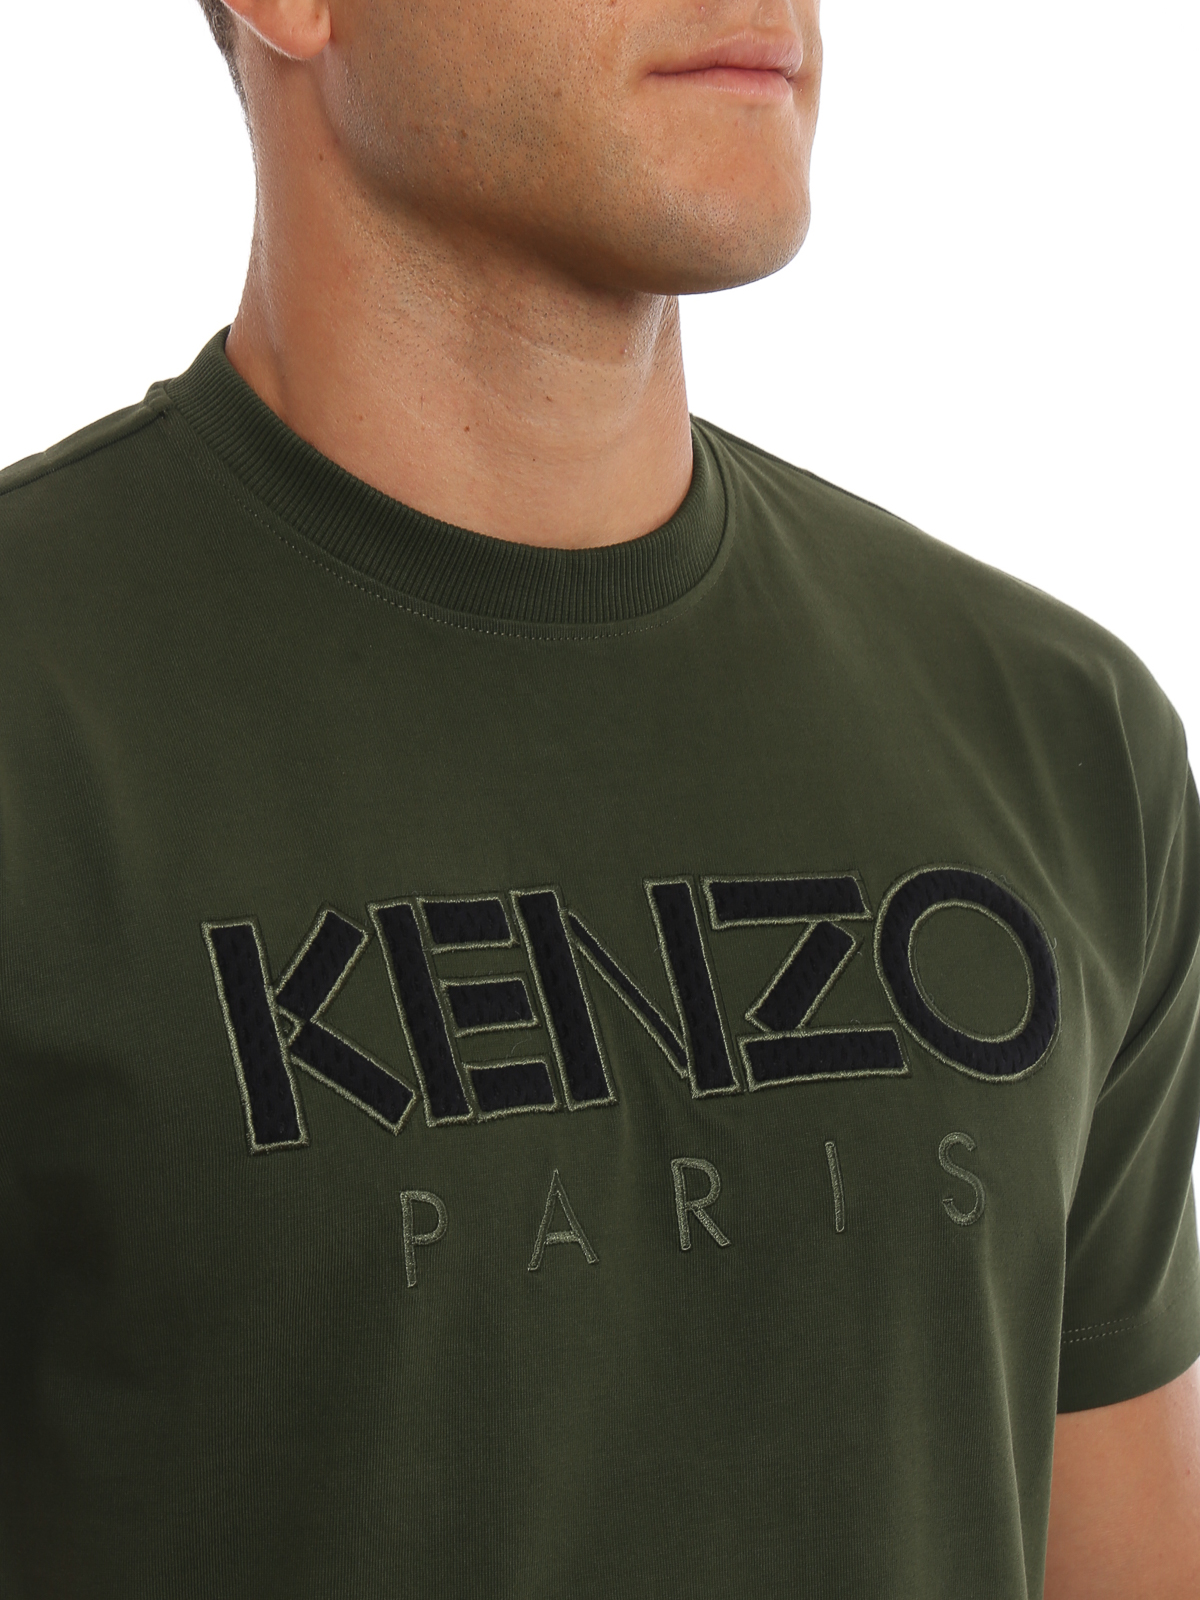 kenzo t shirt embroidered